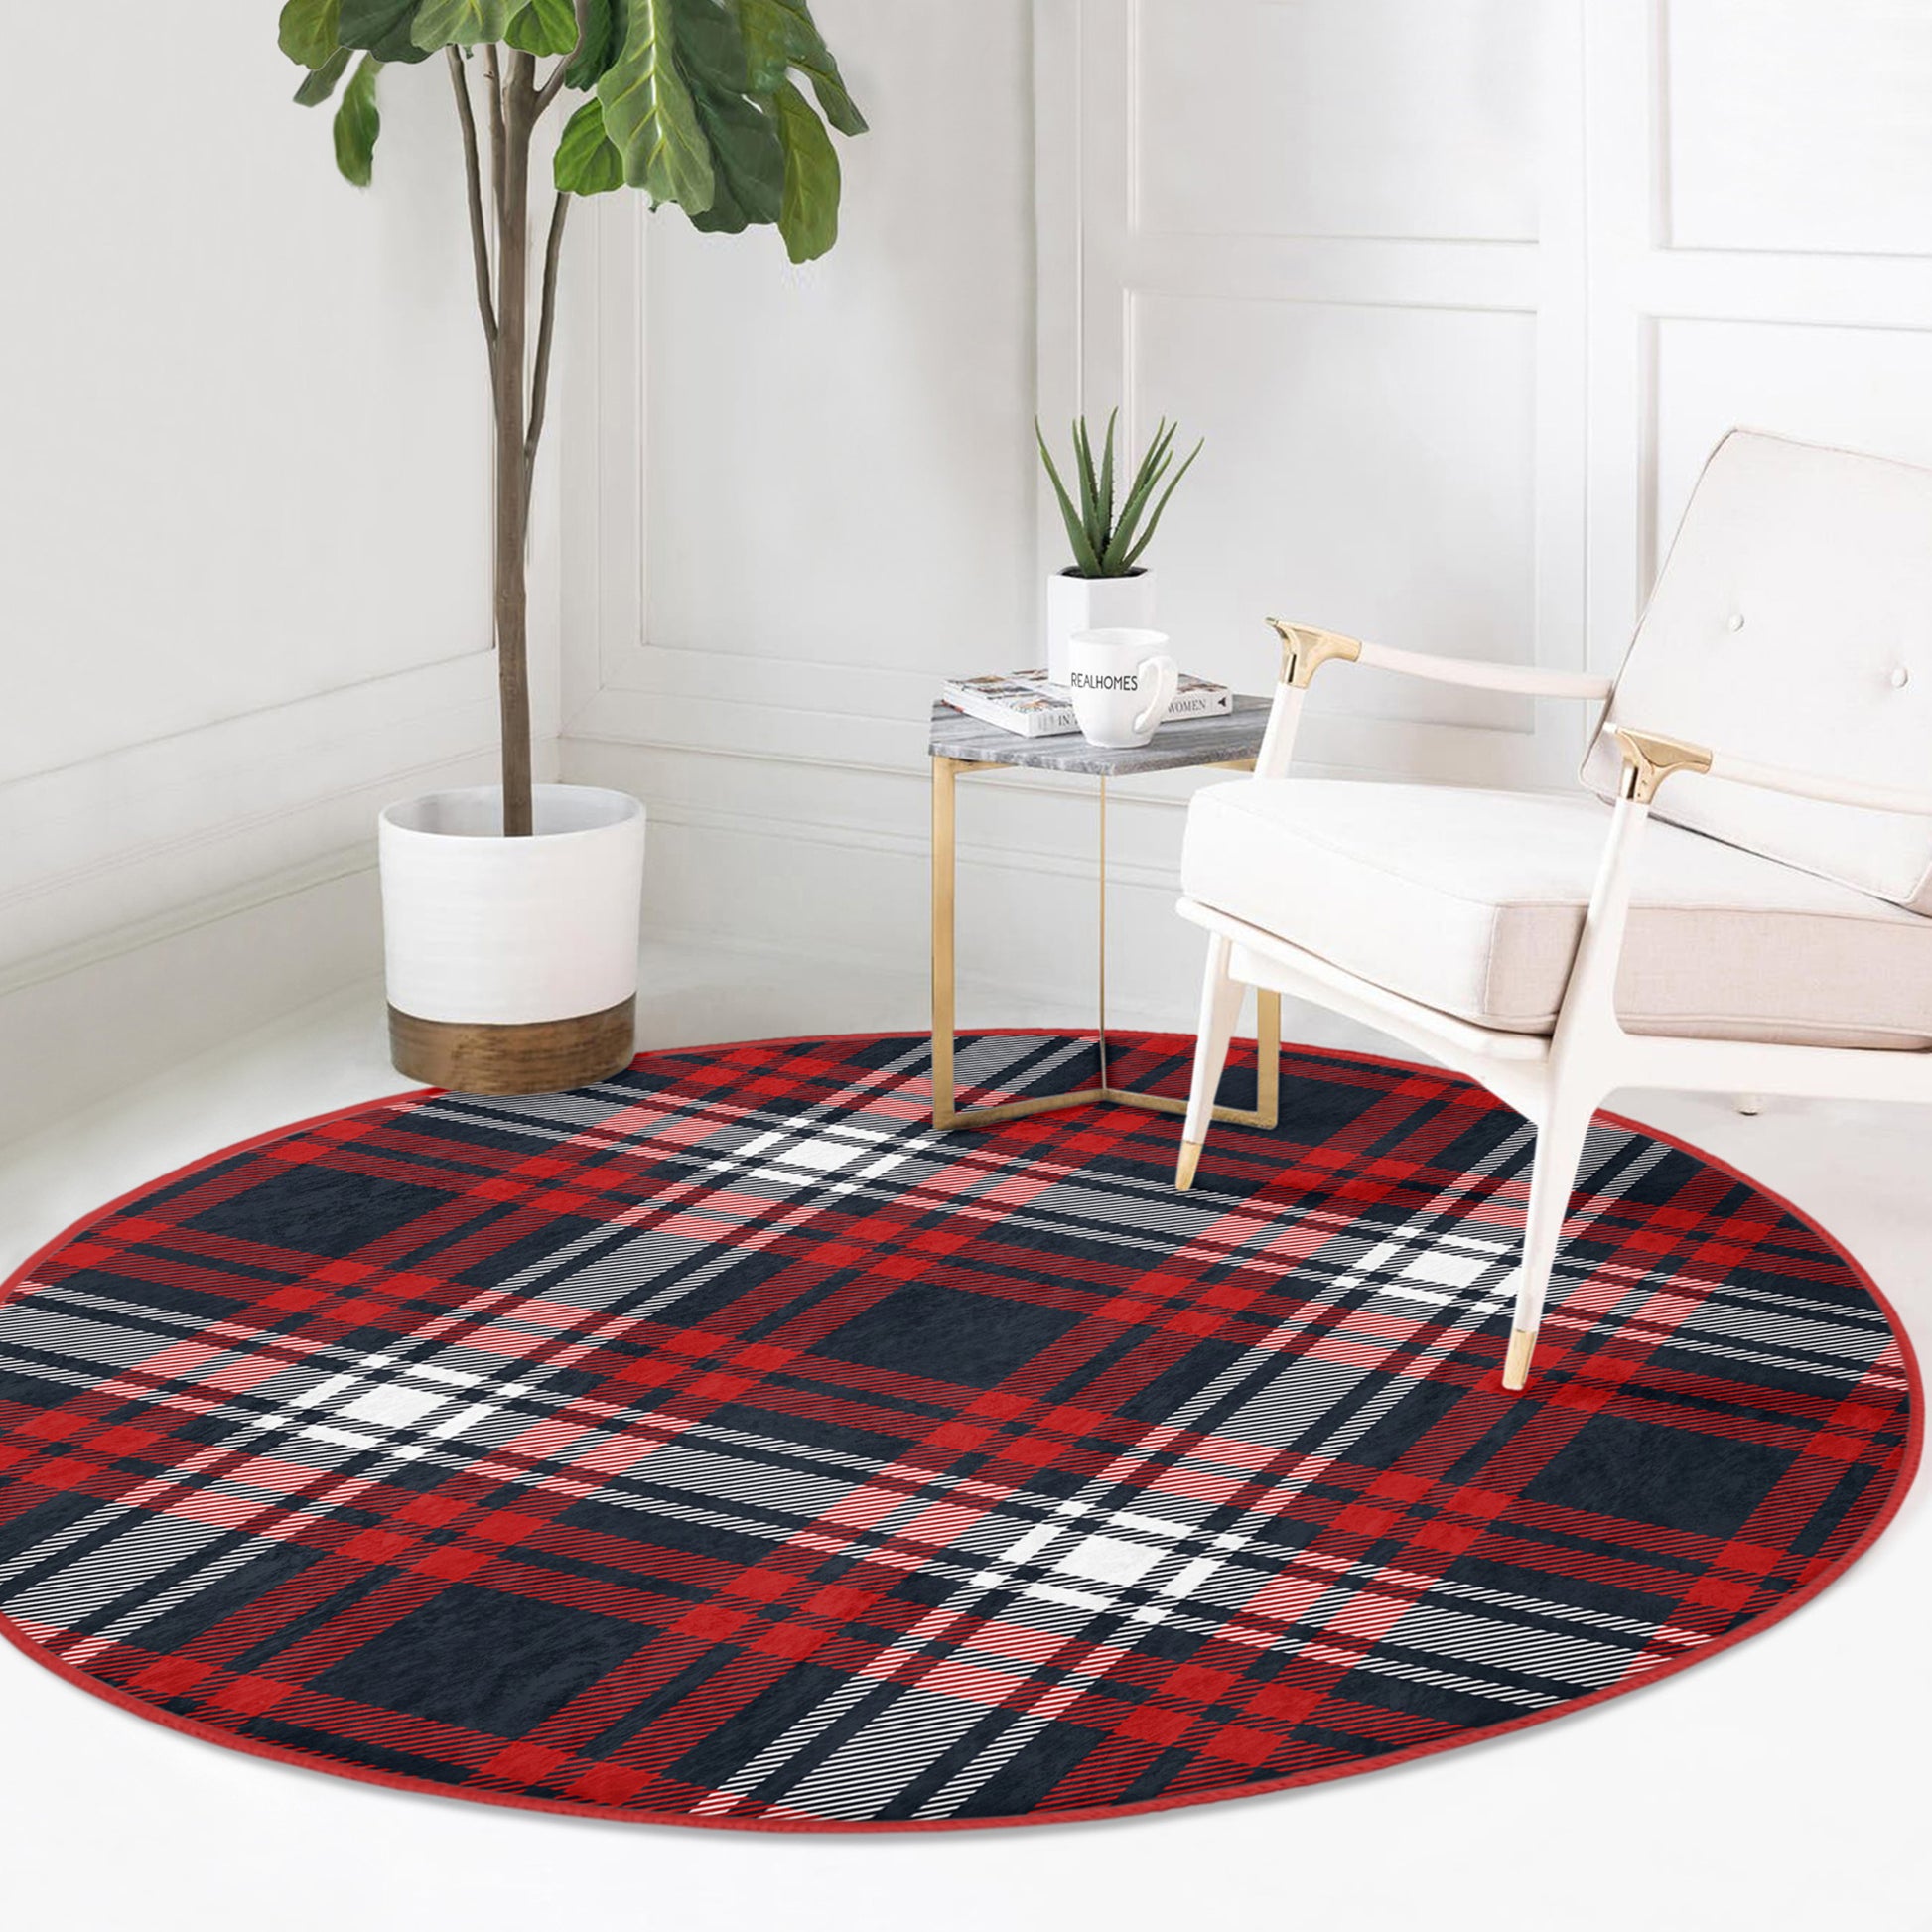 Round Patterned Floor Rug - Cozy Home Ambiance Accent